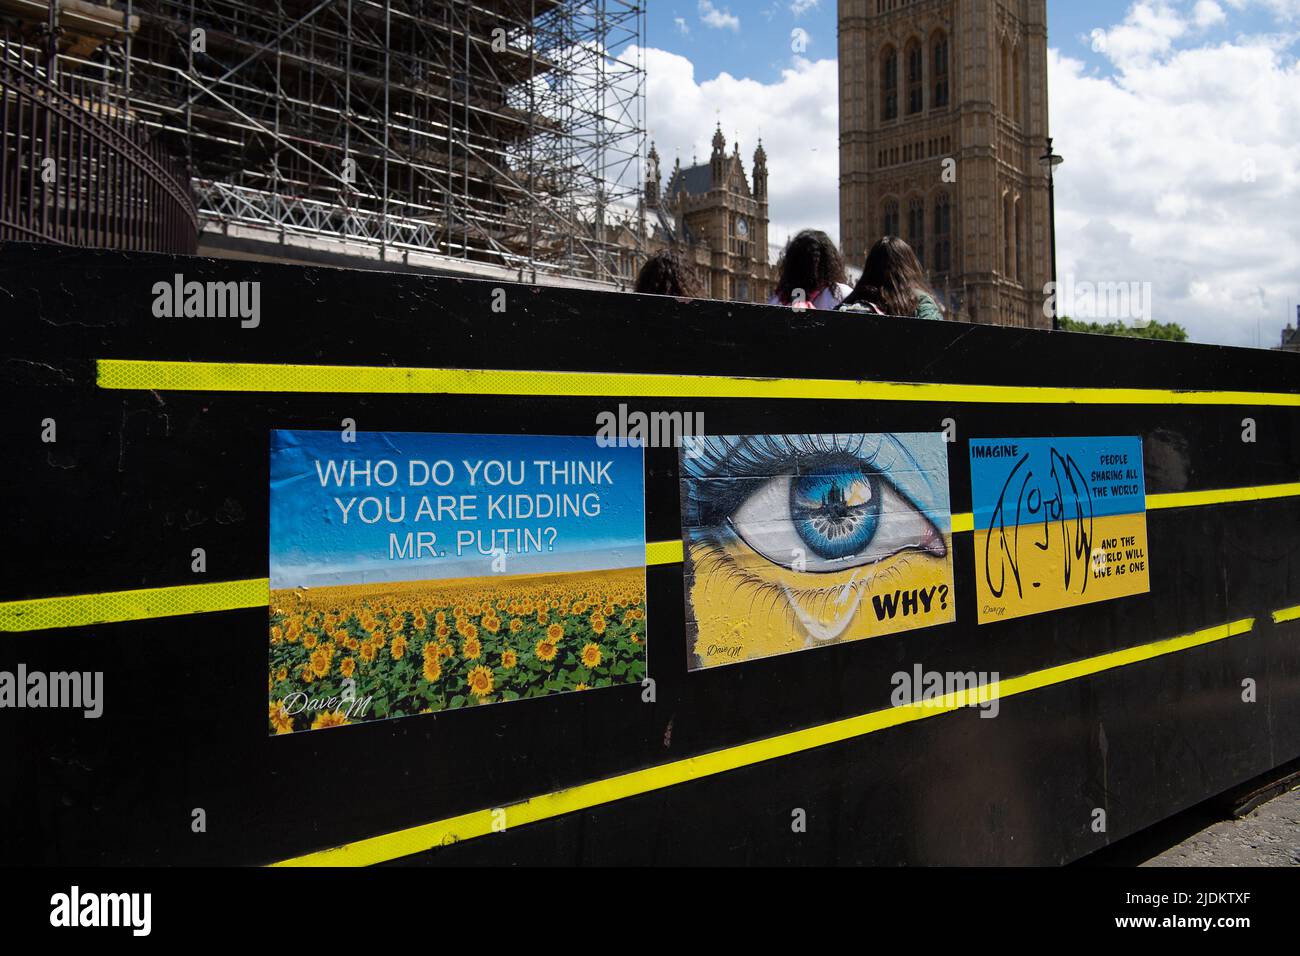 Westminster, London, UK. 8th June, 2022. Posters in the Ukrainian flag colours stuck to security barriers outside the House of Commons questioning the invasion of Ukraine by Russia. Credit: Maureen McLean/Alamy Stock Photo